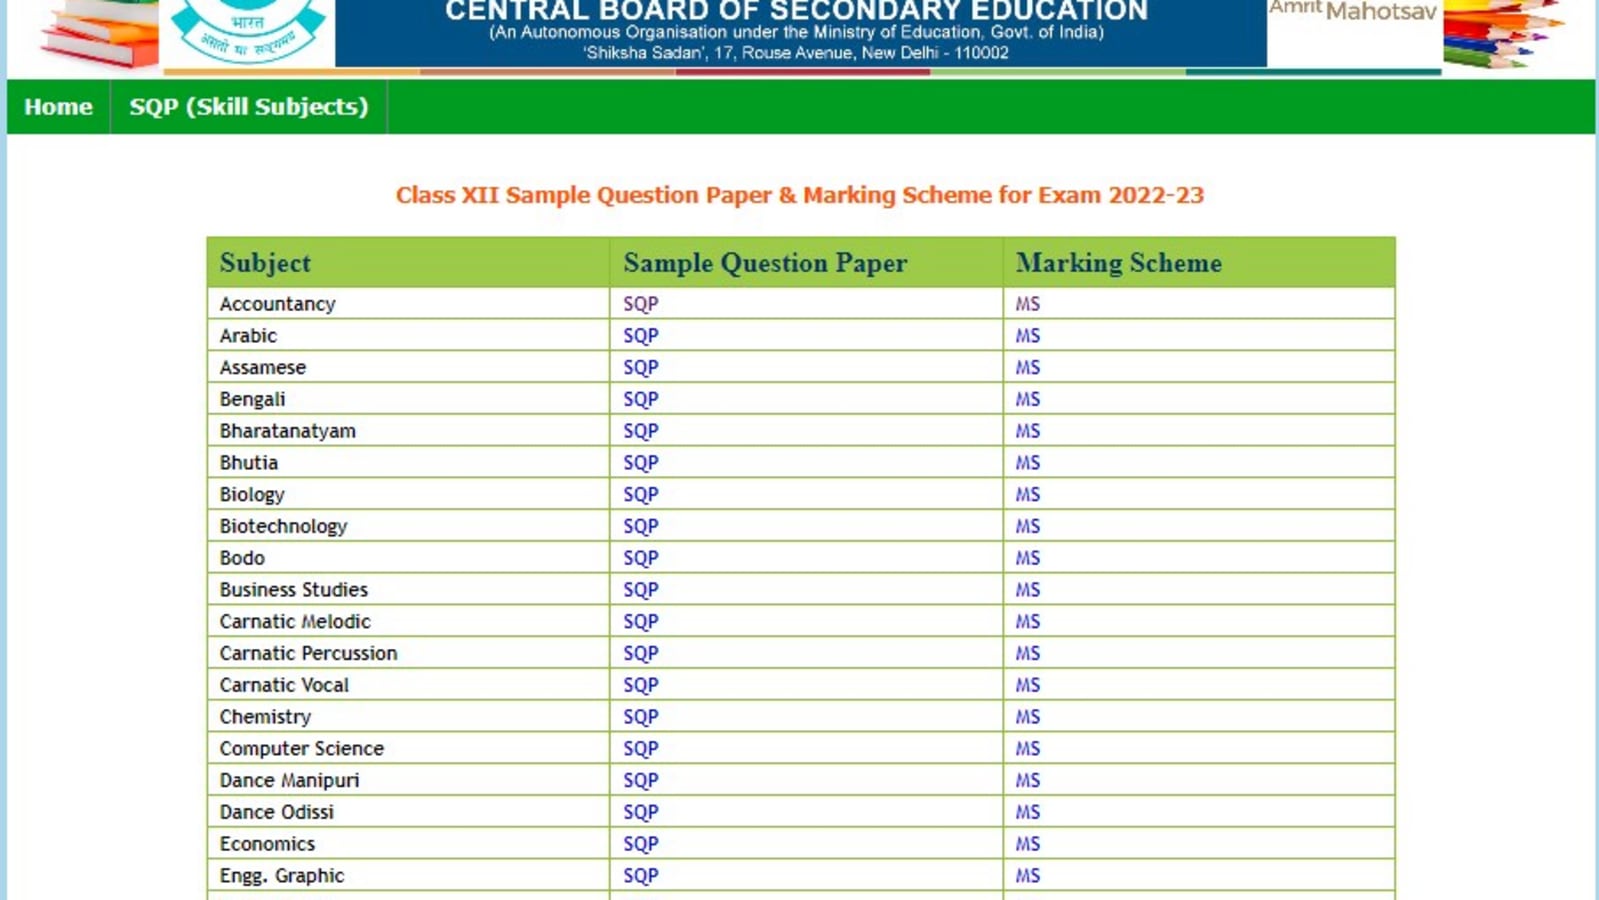 CBSE sample question papers 2022-23 out for 10th and 12th at cbseacademic.nic.in